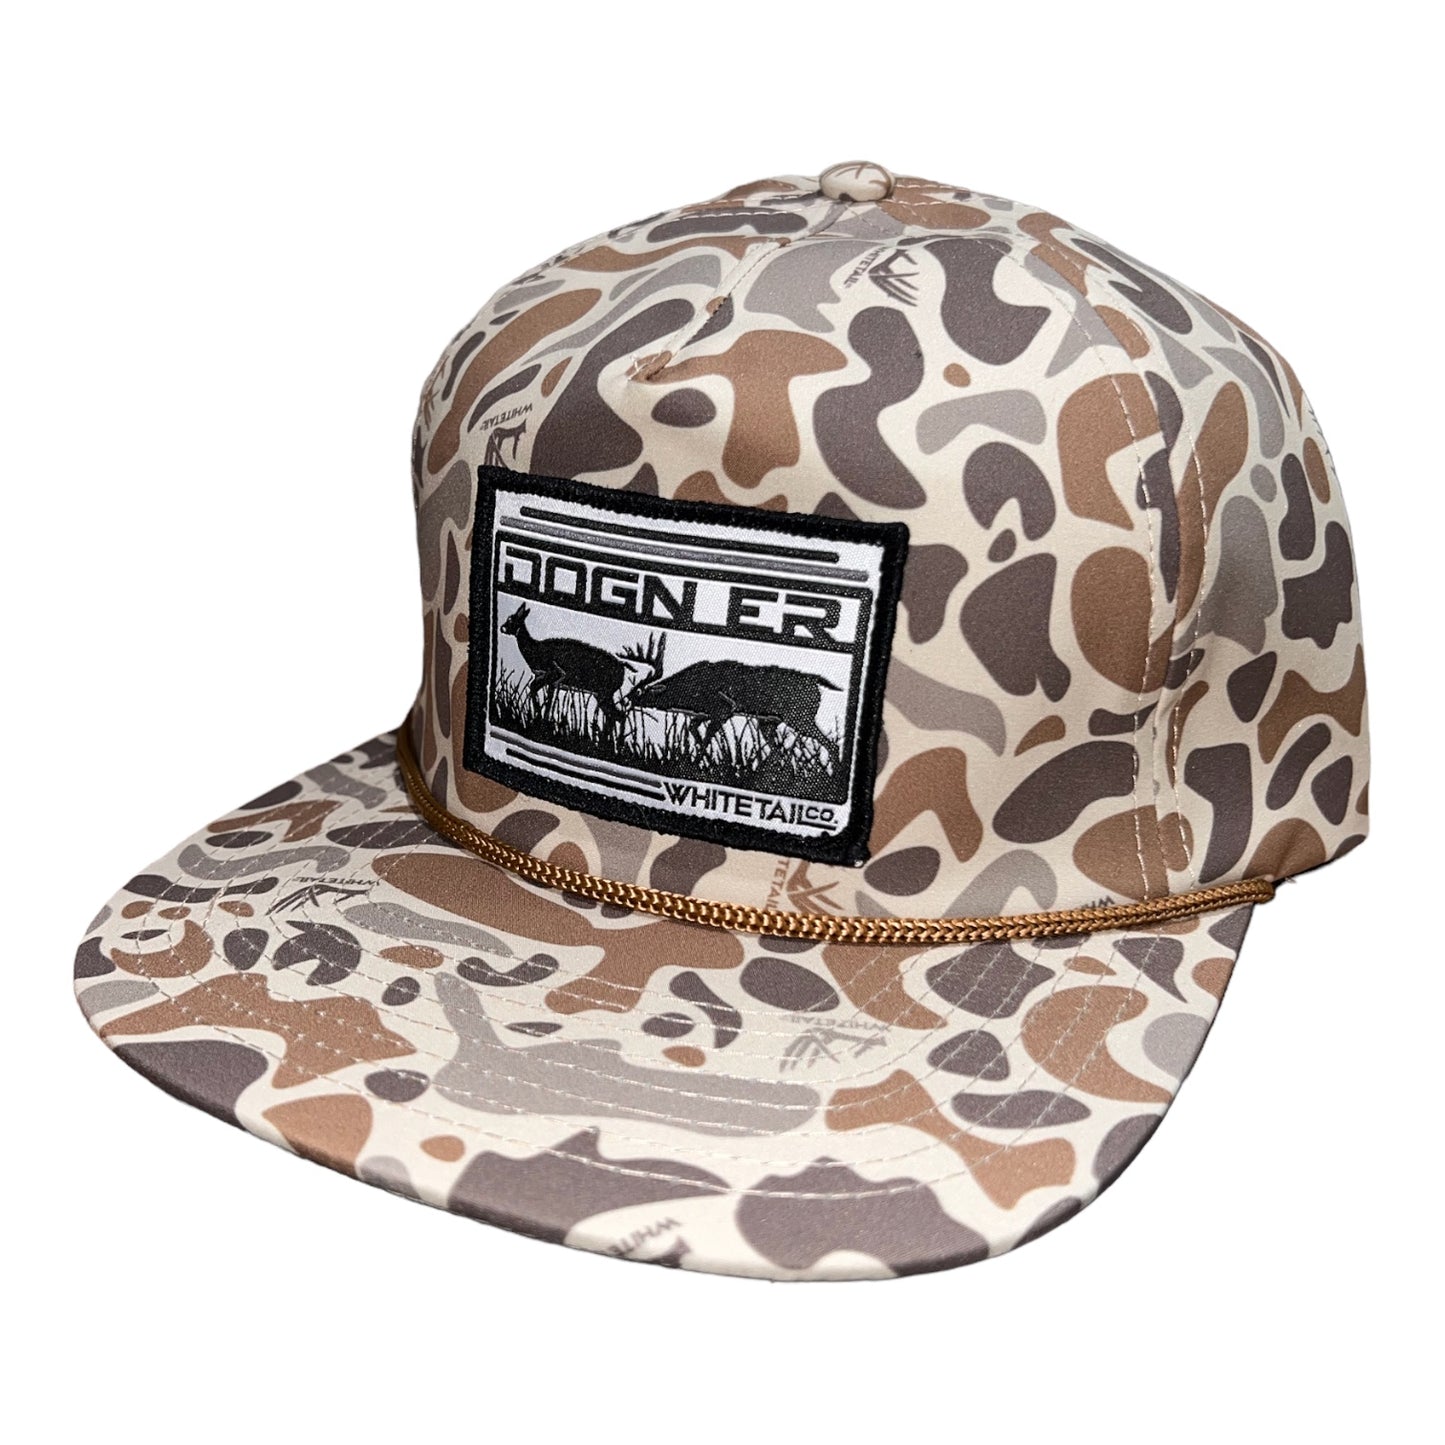 Whitetail Co. Dogn Er Camo Ropy Trucker Non Structured